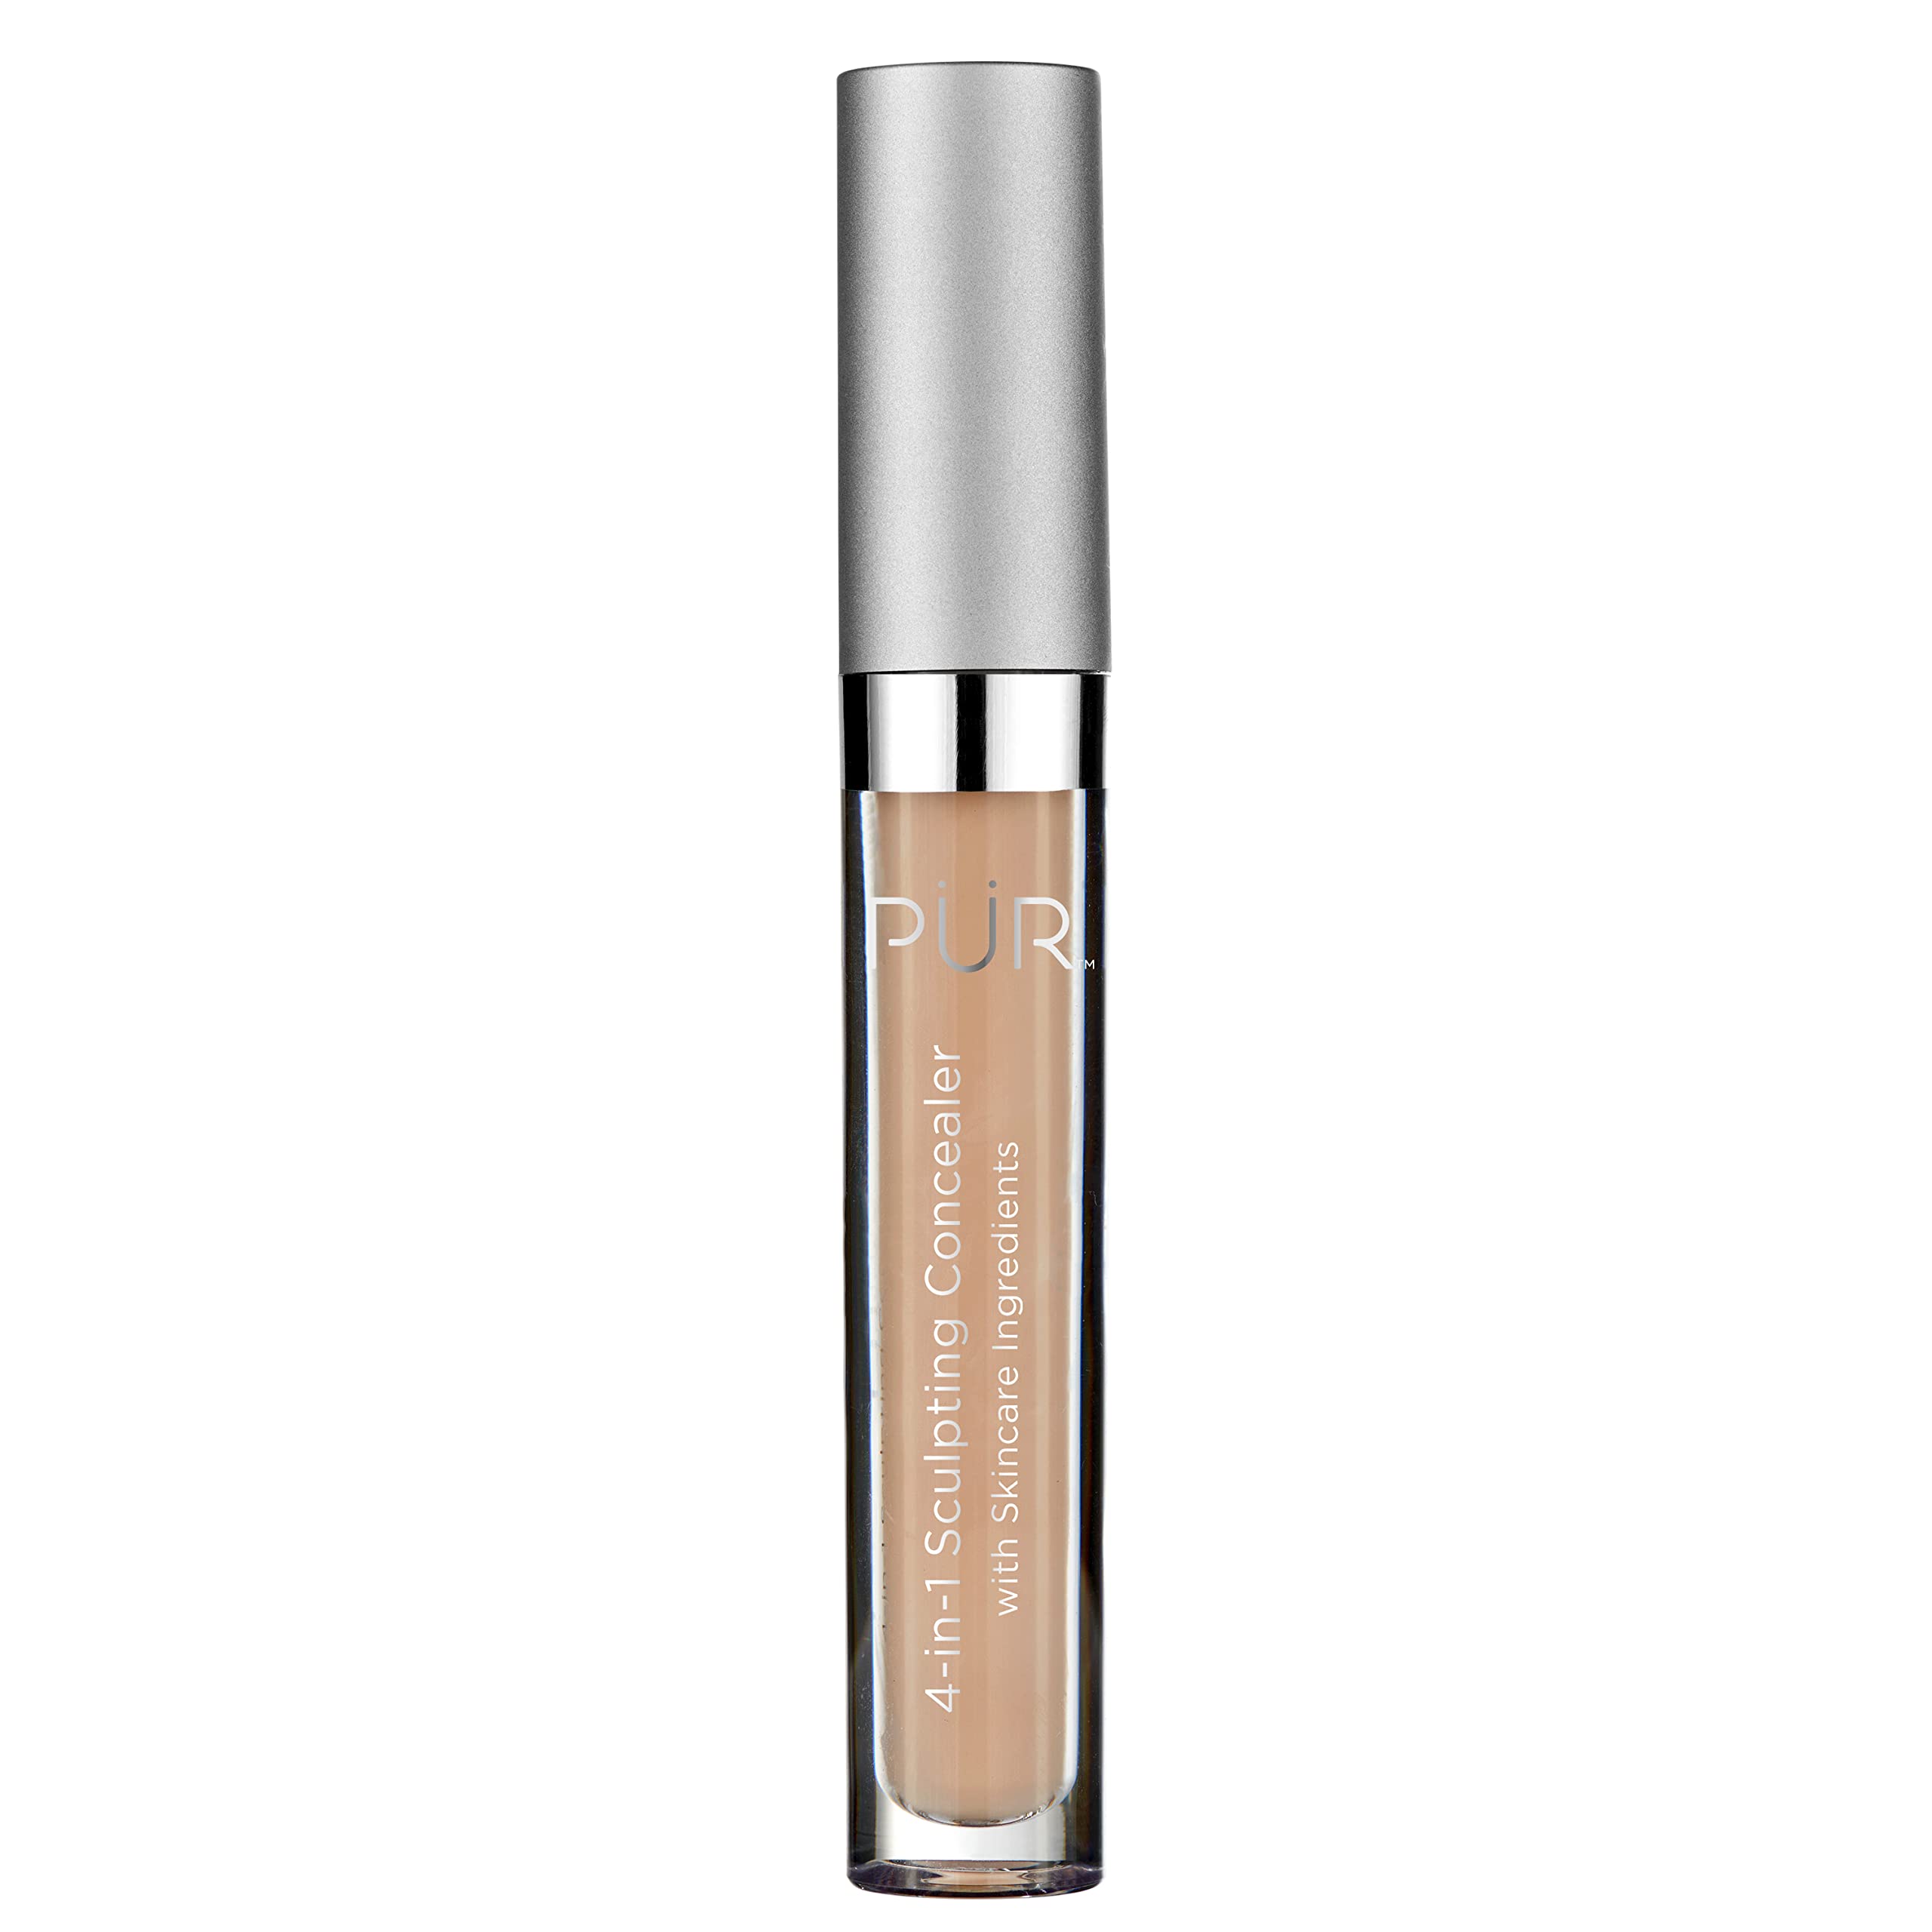 PÜR 4-in-1 Sculpting Concealer, Moisturizing Formula, Covers Imperfections, Lightweight medium to full coverage, Revitalizes Complexion, Cruelty-Free, Gluten Free